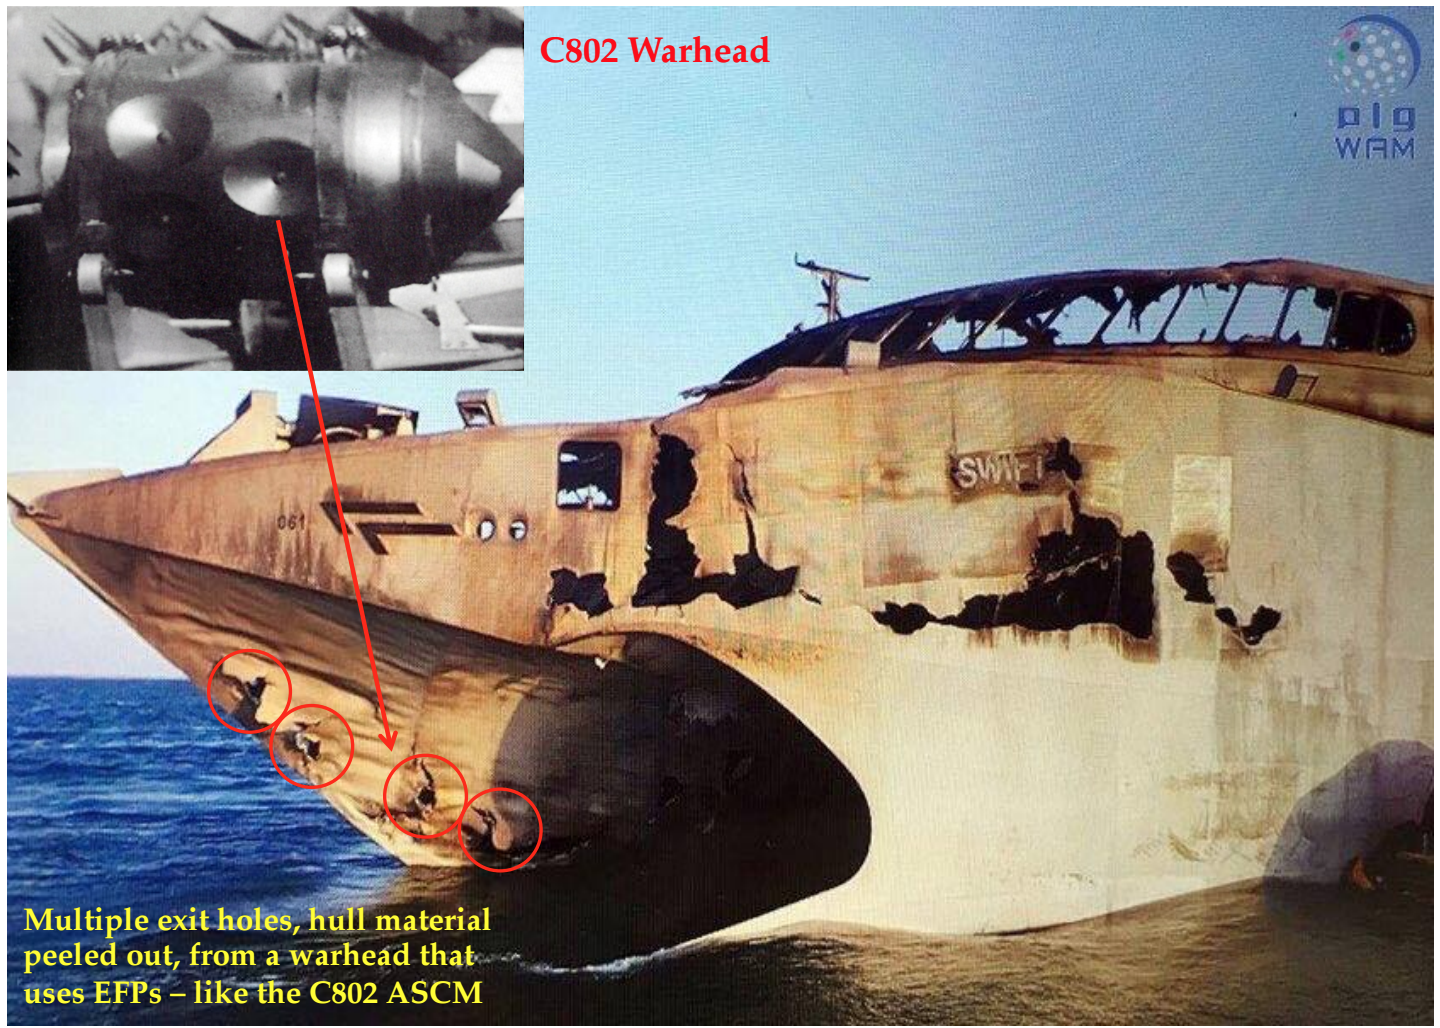 New Facts about Yemen Missile Attack on USS Mason: US Ship Fired 3 Missiles to Defend Itself